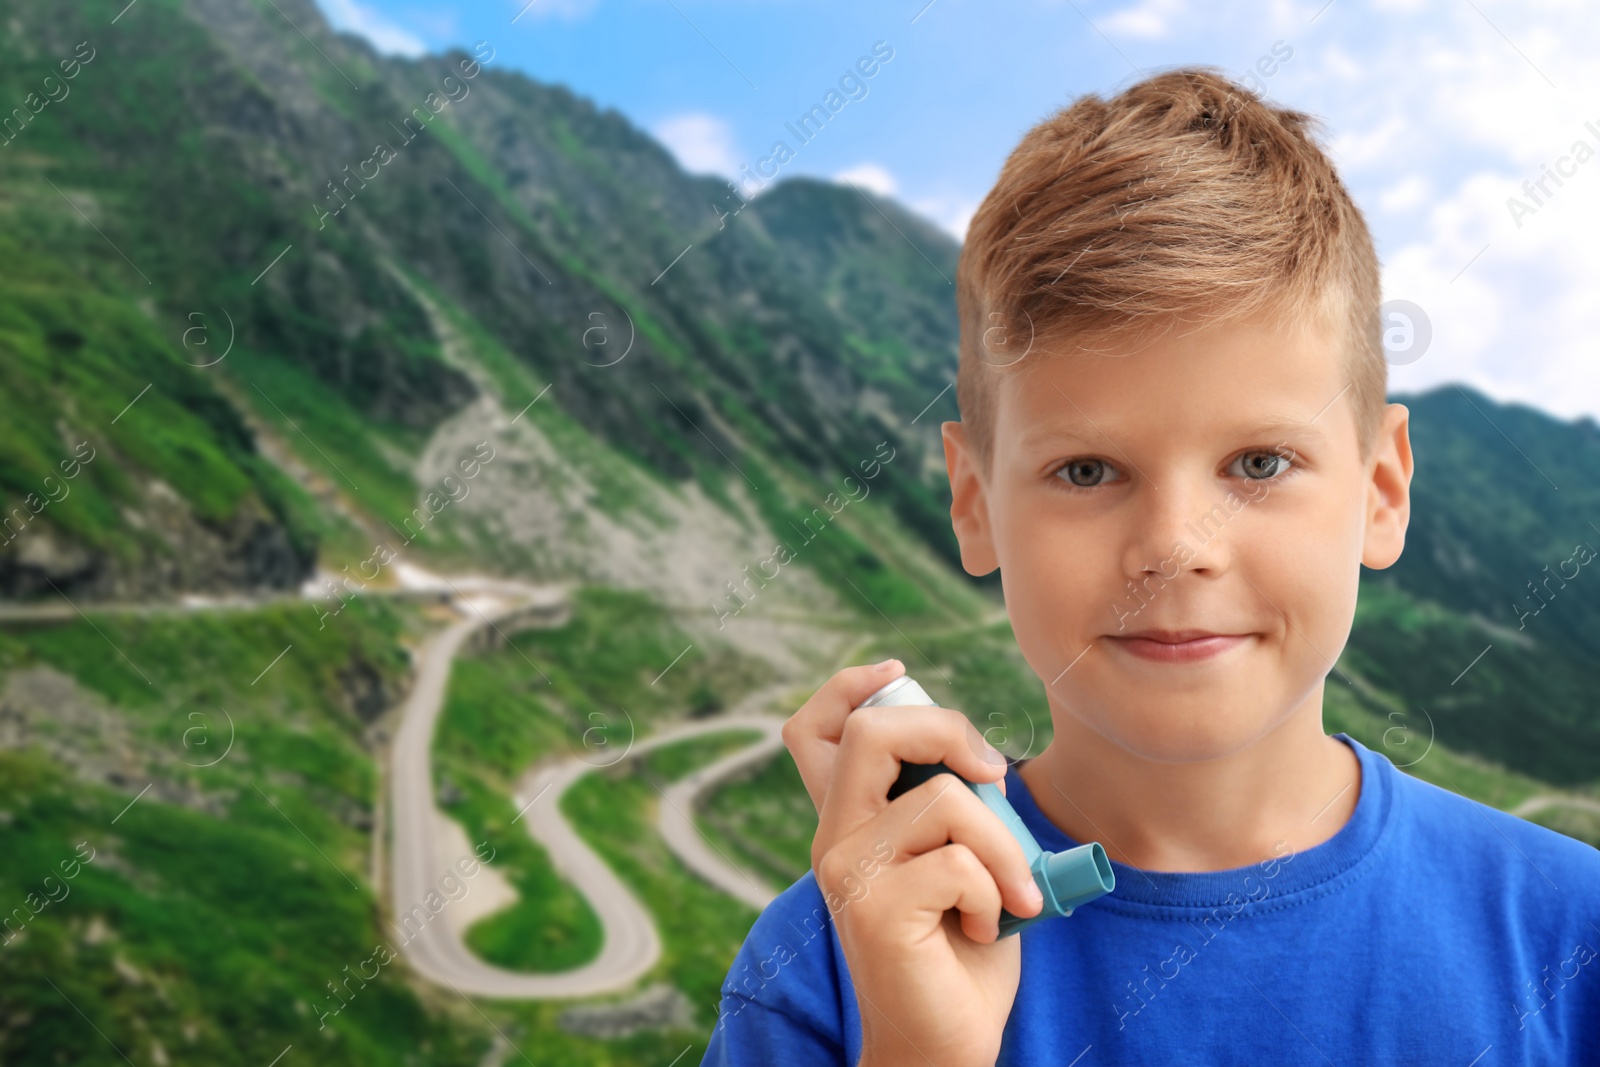 Image of Little boy with asthma inhaler in mountains on sunny day. Emergency first aid during outdoor recreation